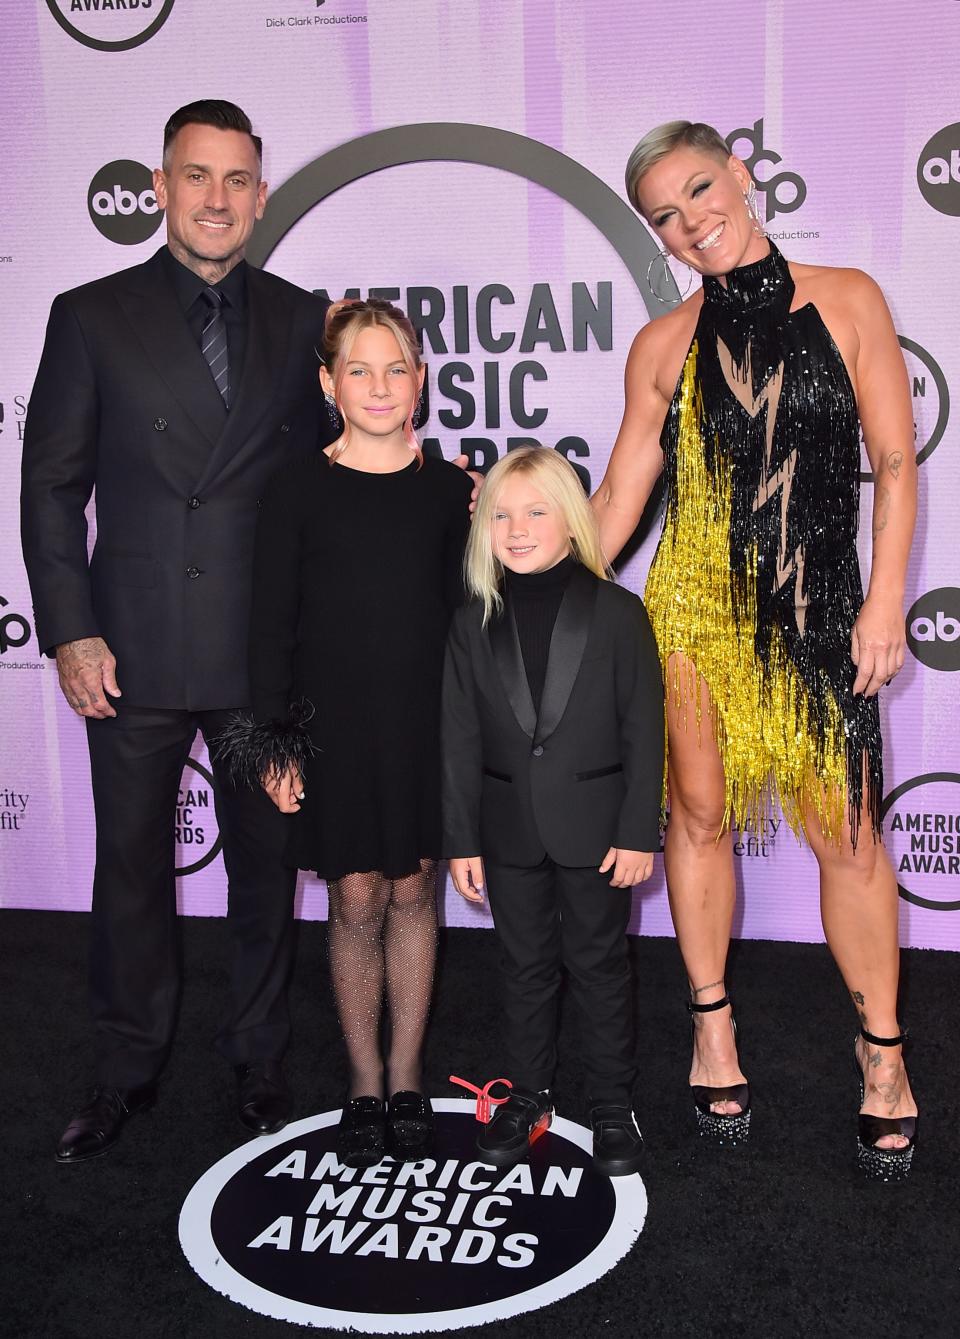 Carey Hart (left), Pink (right) and their children, Willow Sage Hart (second from left) and Jameson Moon Hart at the American Music Awards in 2022.